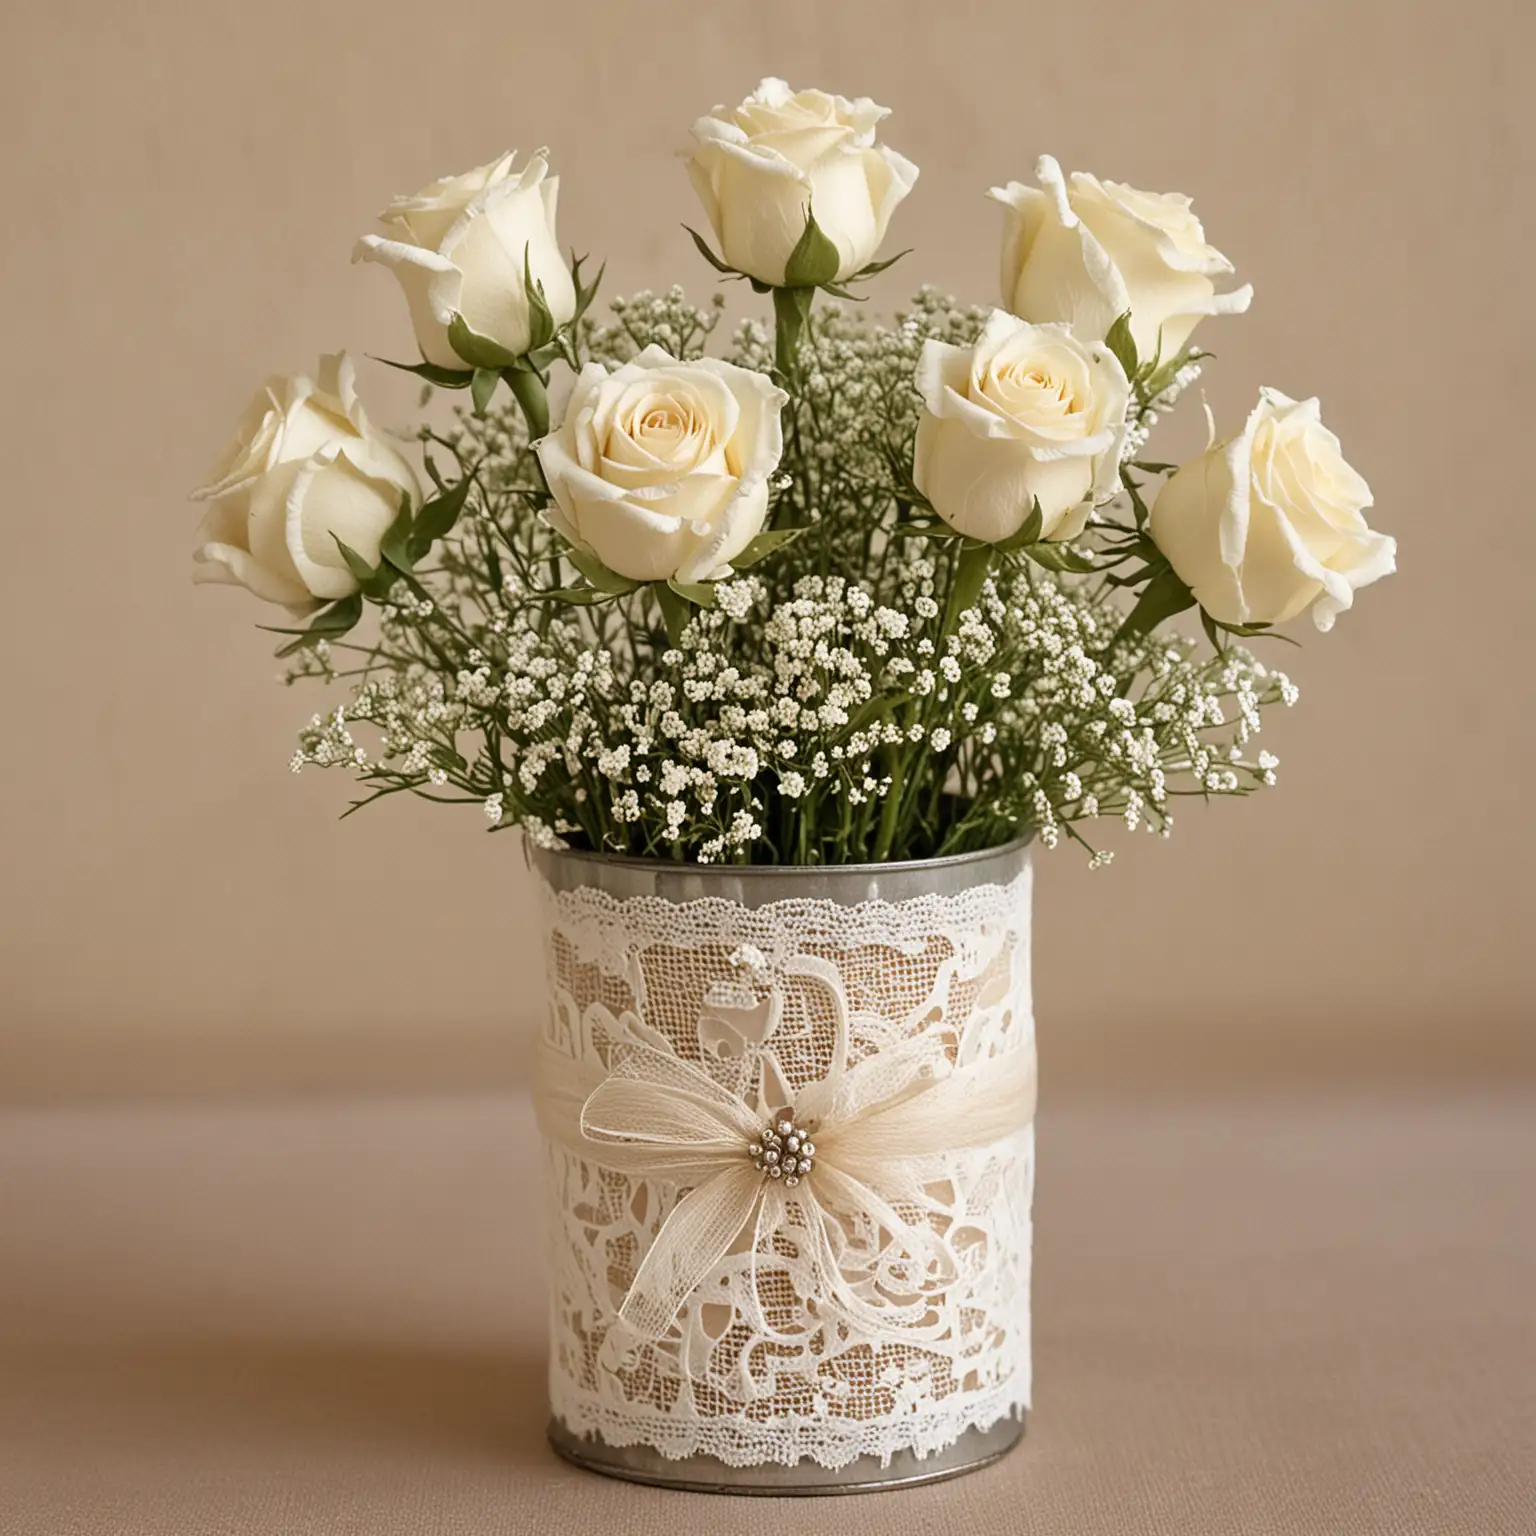 Vintage-Tin-Can-Vase-with-Ivory-Roses-and-Lace-for-Simple-Centerpiece